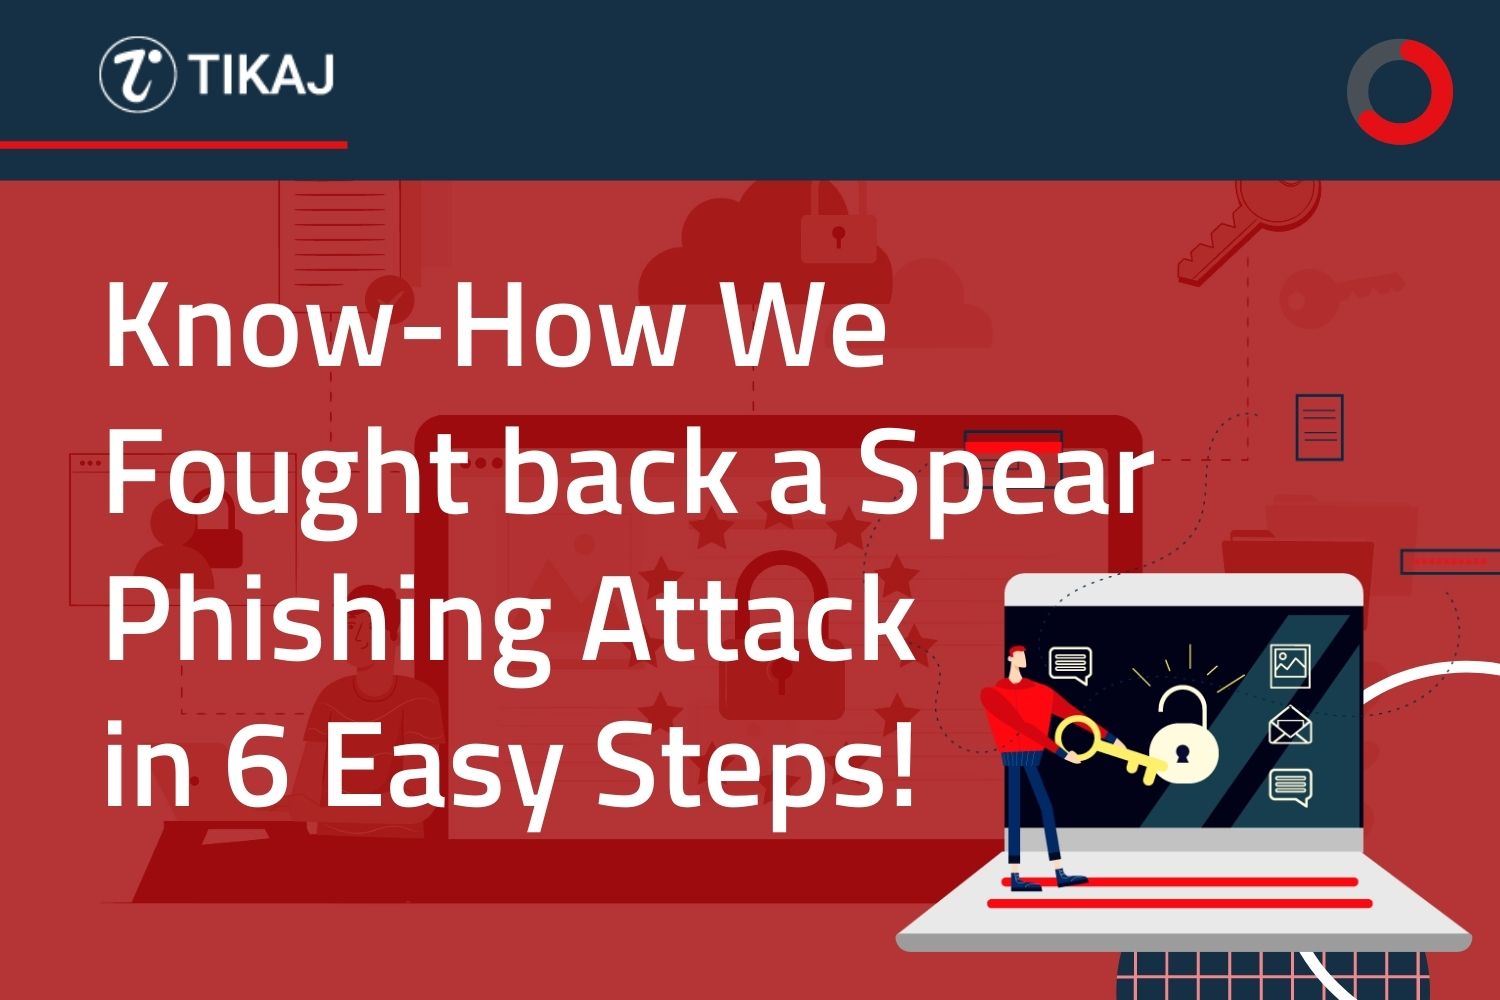 Know-How : We Fought back a Spear Phishing Attack in 6 Easy Steps!